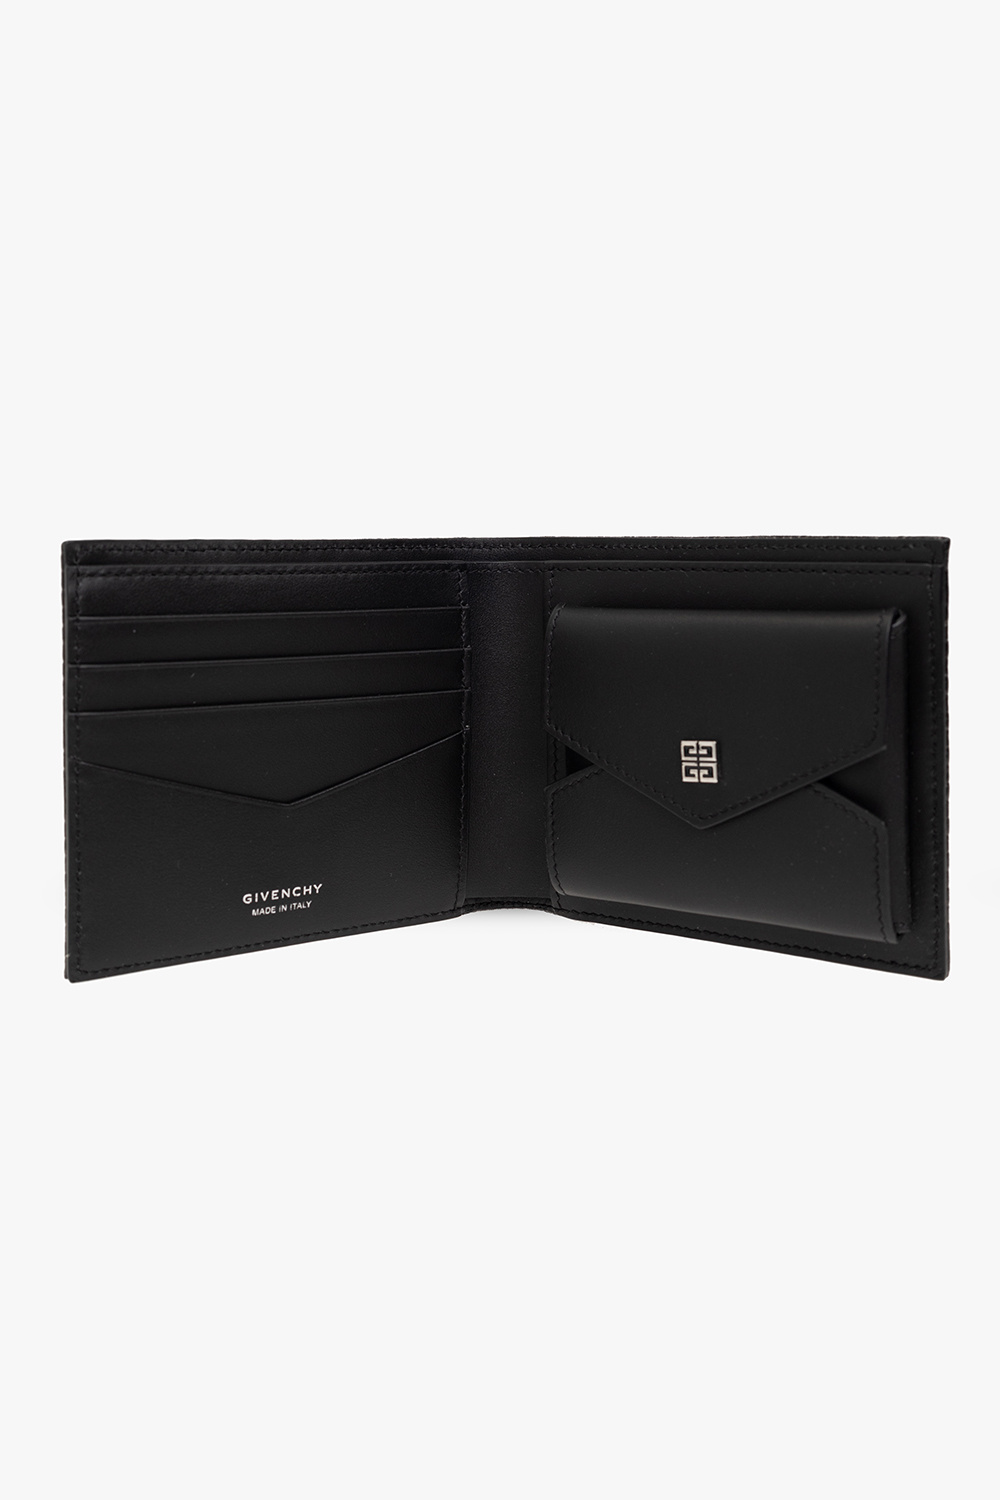 Givenchy Givenchy 4G Grain Leather Billfold Wallet